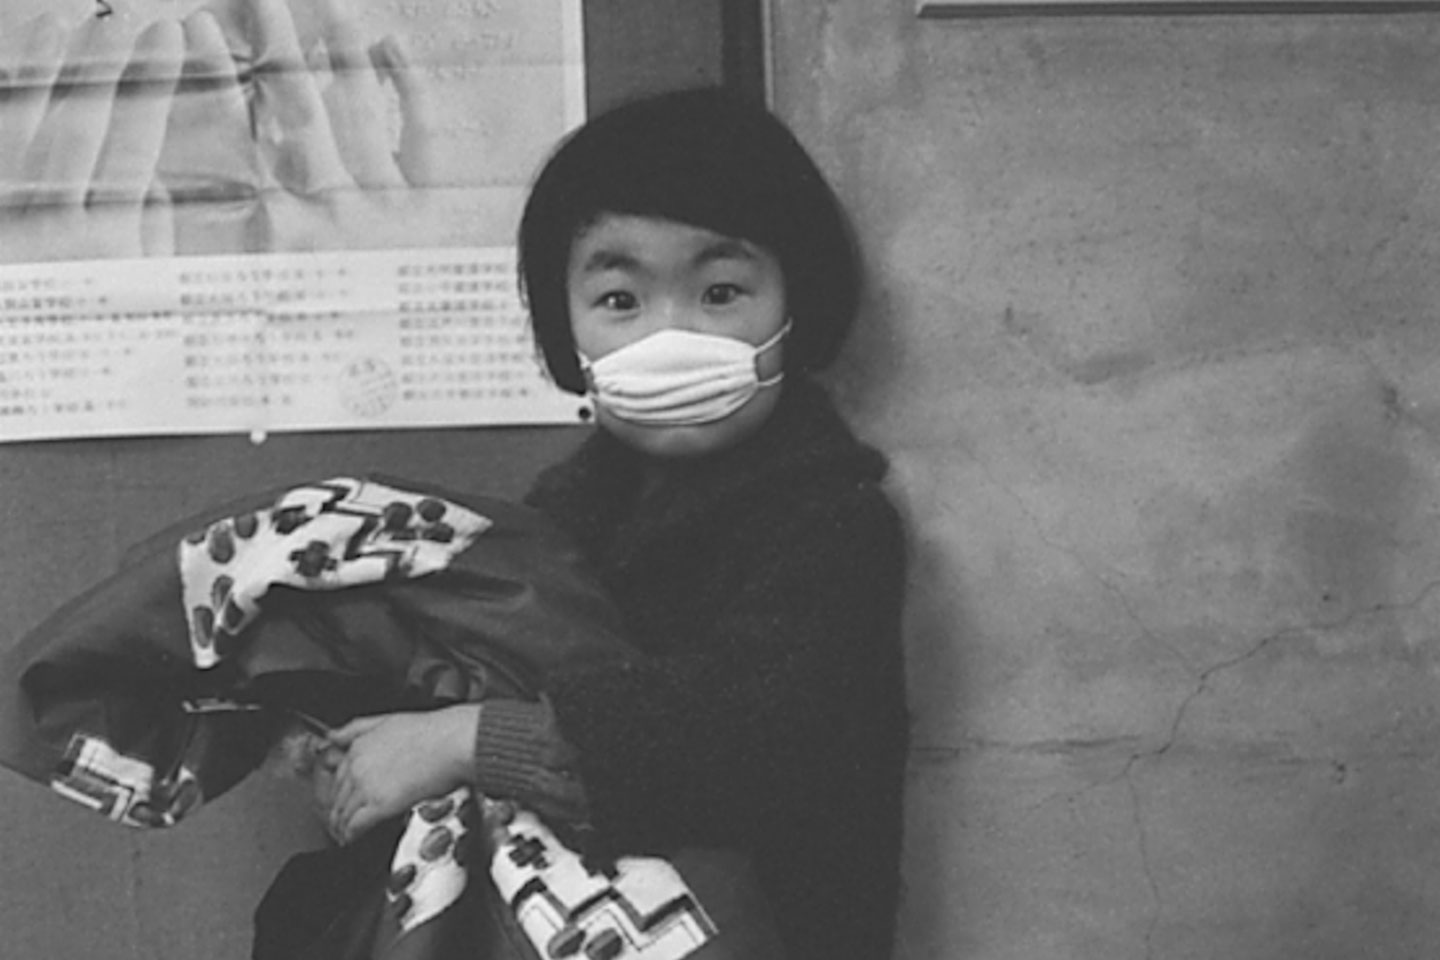 100 years and counting of mask wearing in Japan | Gavi, the Vaccine Alliance